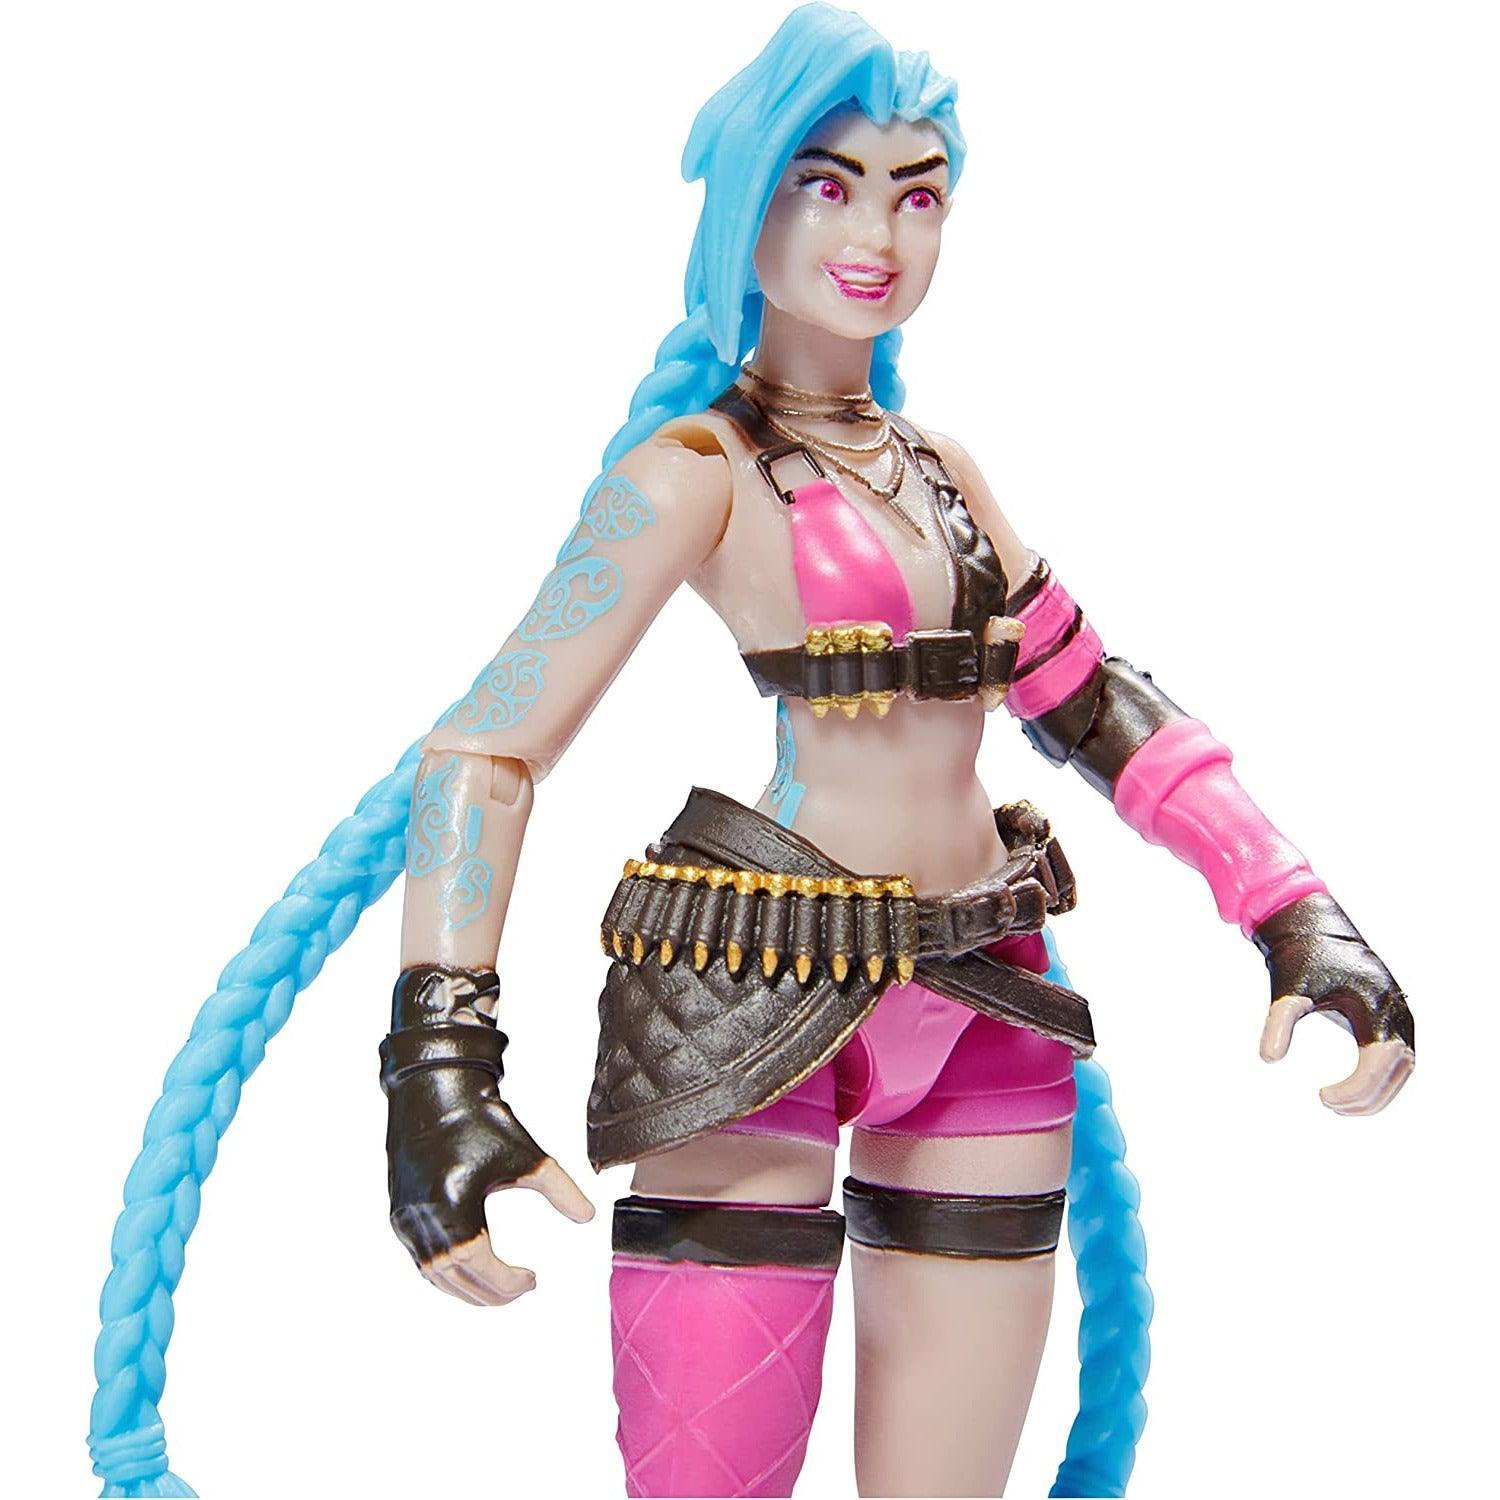 League of Legends, Official 4-Inch Jinx Collectible Figure with Premium Details and 2 Accessories, The Champion Collection - BumbleToys - 5-7 Years, Boys, Figures, Heroes, LEAGUE OF LEGENDS, Pre-Order